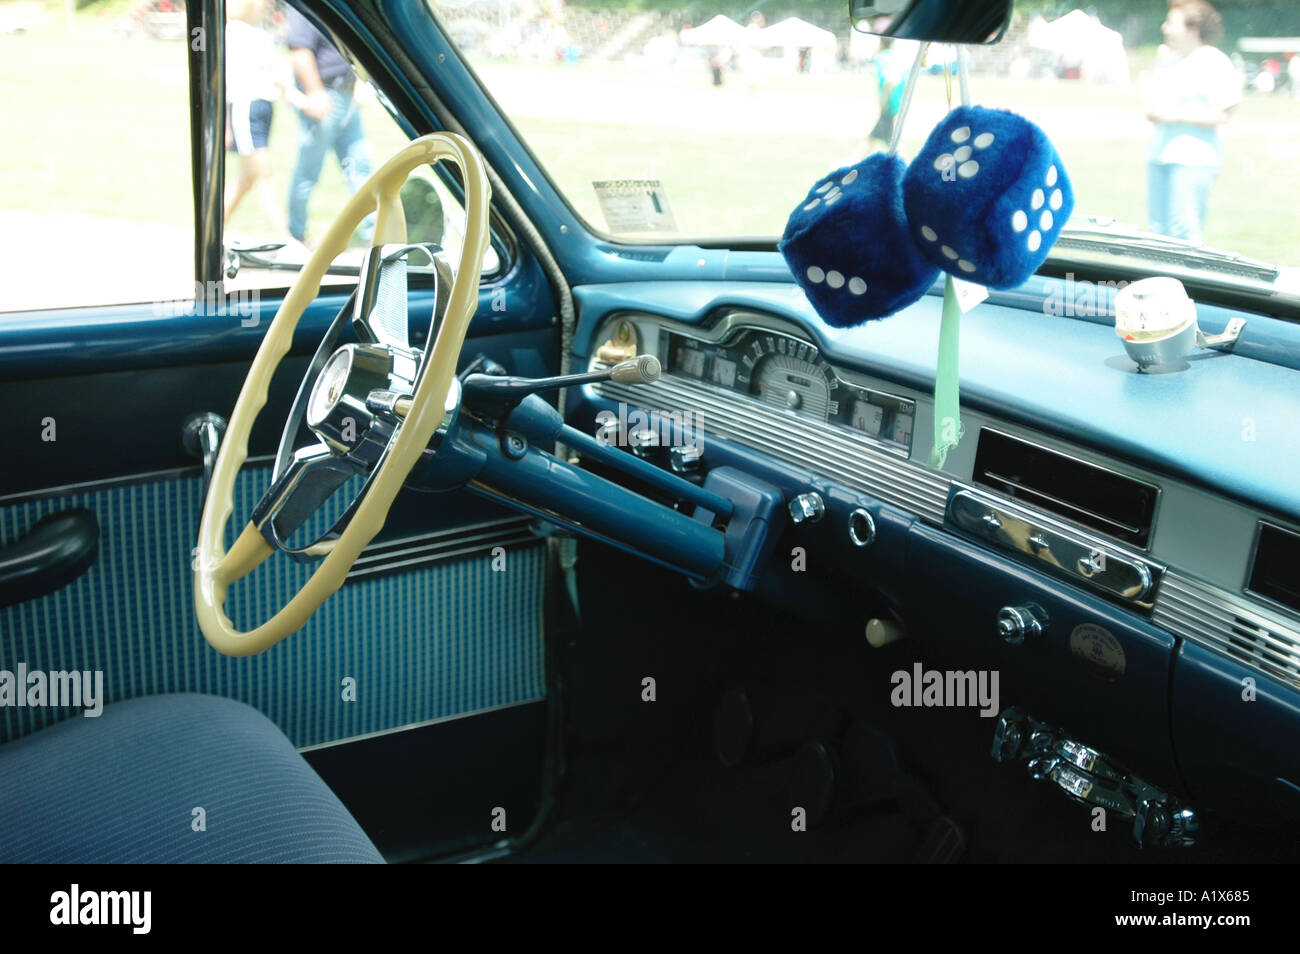 Fuzzy dice hanging from the rear view mirror of an old antique car Americana Stock Photo